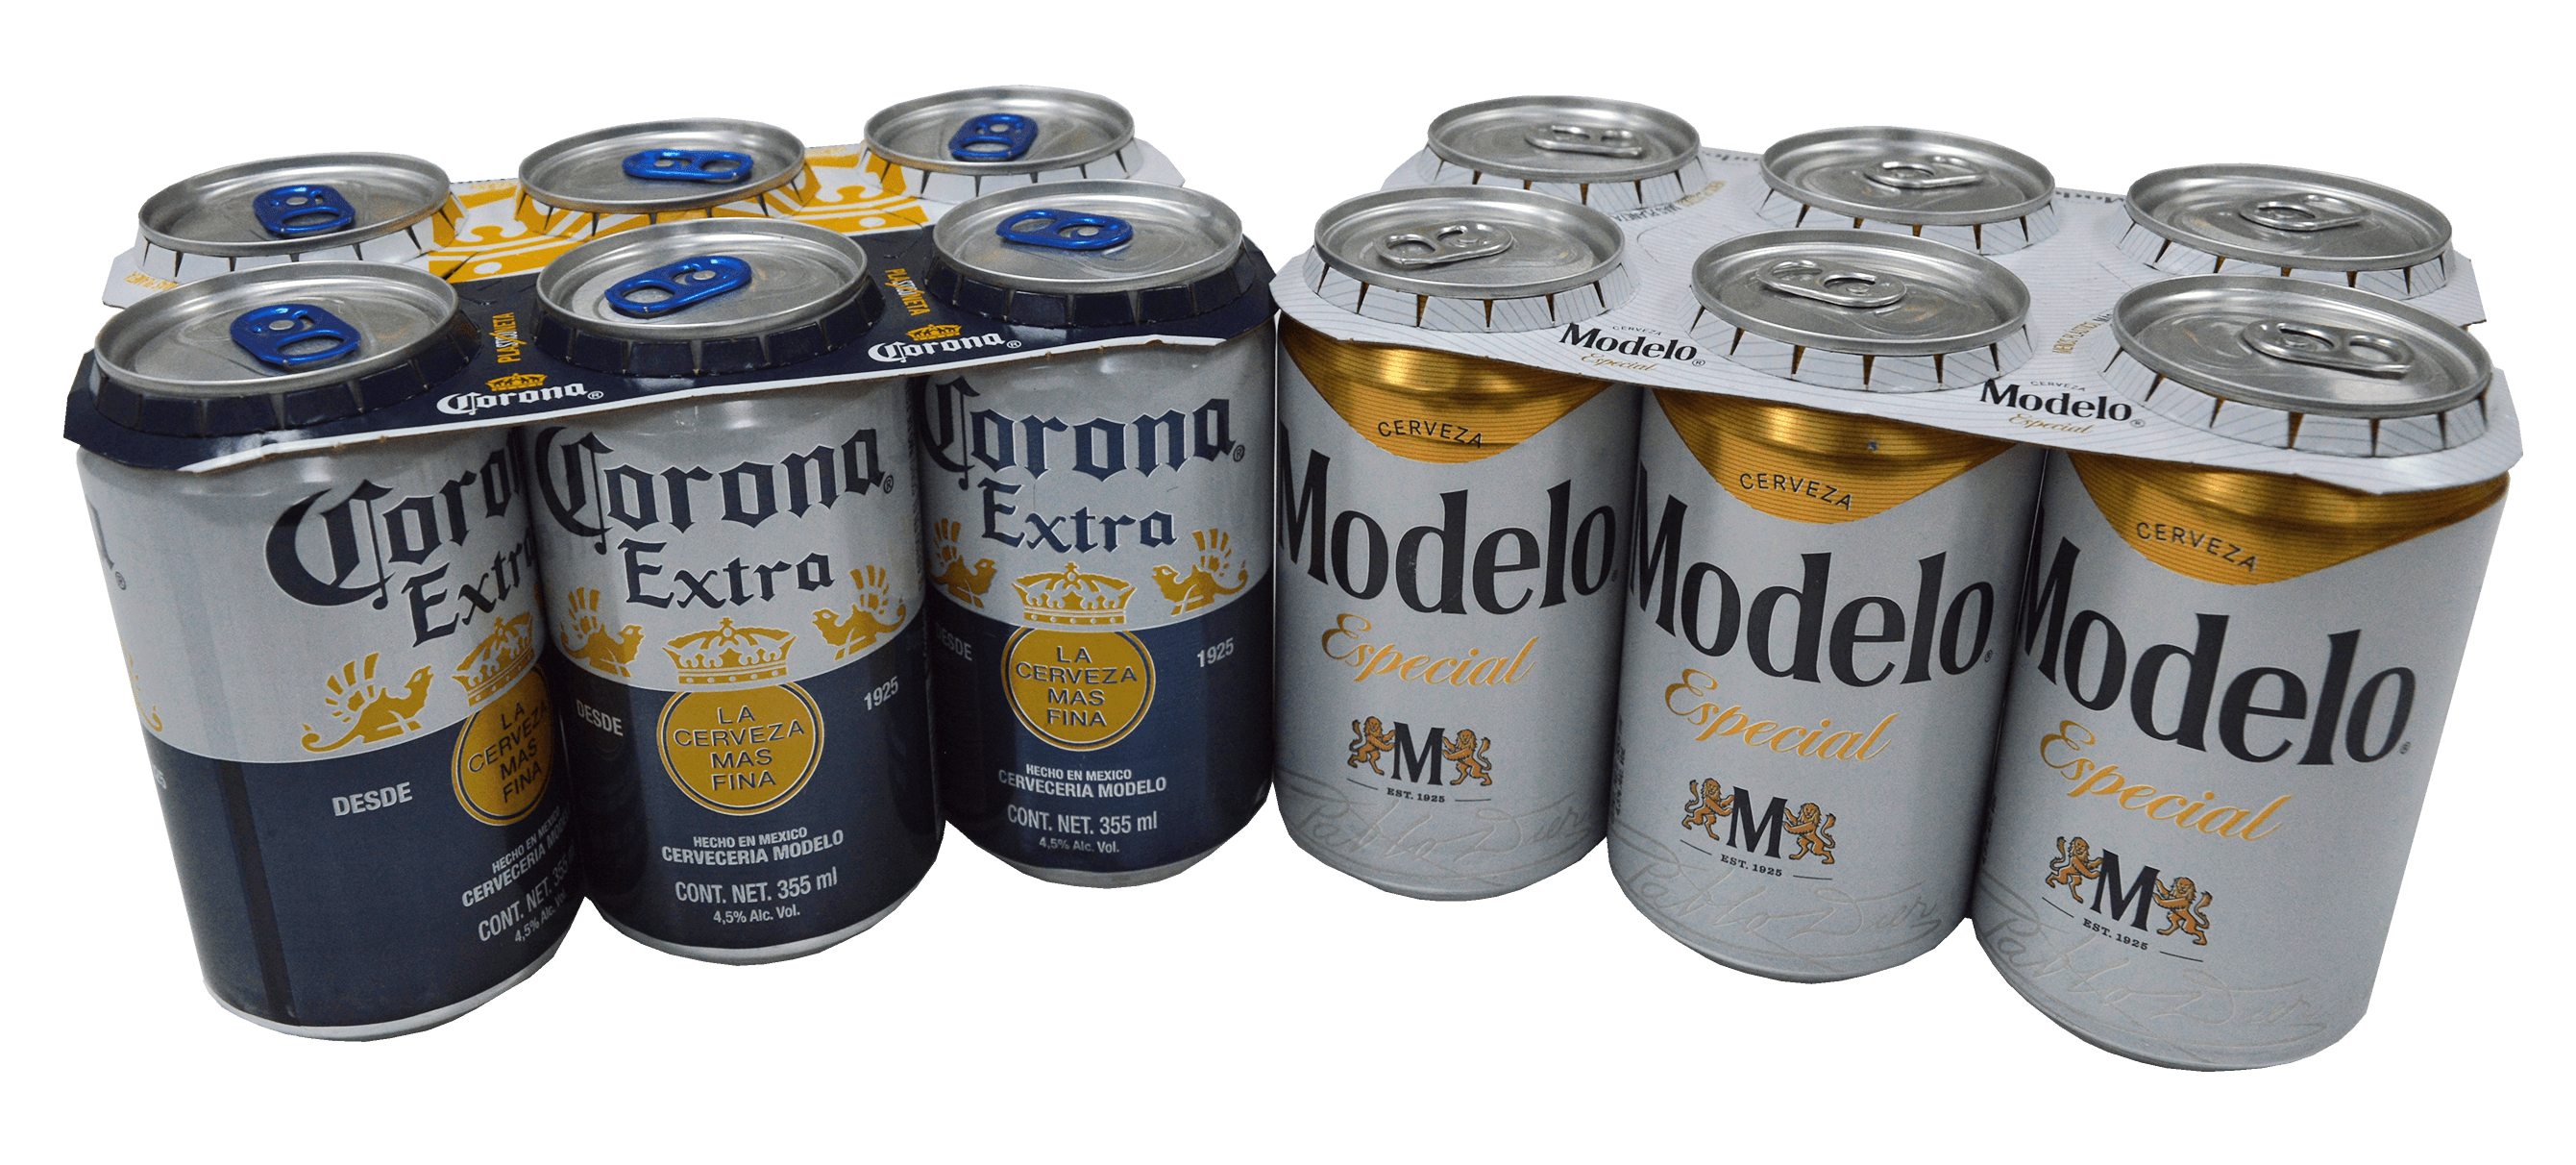 Grupo Modelo Partners With WestRock and Grupo Gondi in Transition to  CanCollar® Eco Packaging, Eliminating Over 100 Tons1 of Plastic Waste |  Business Wire